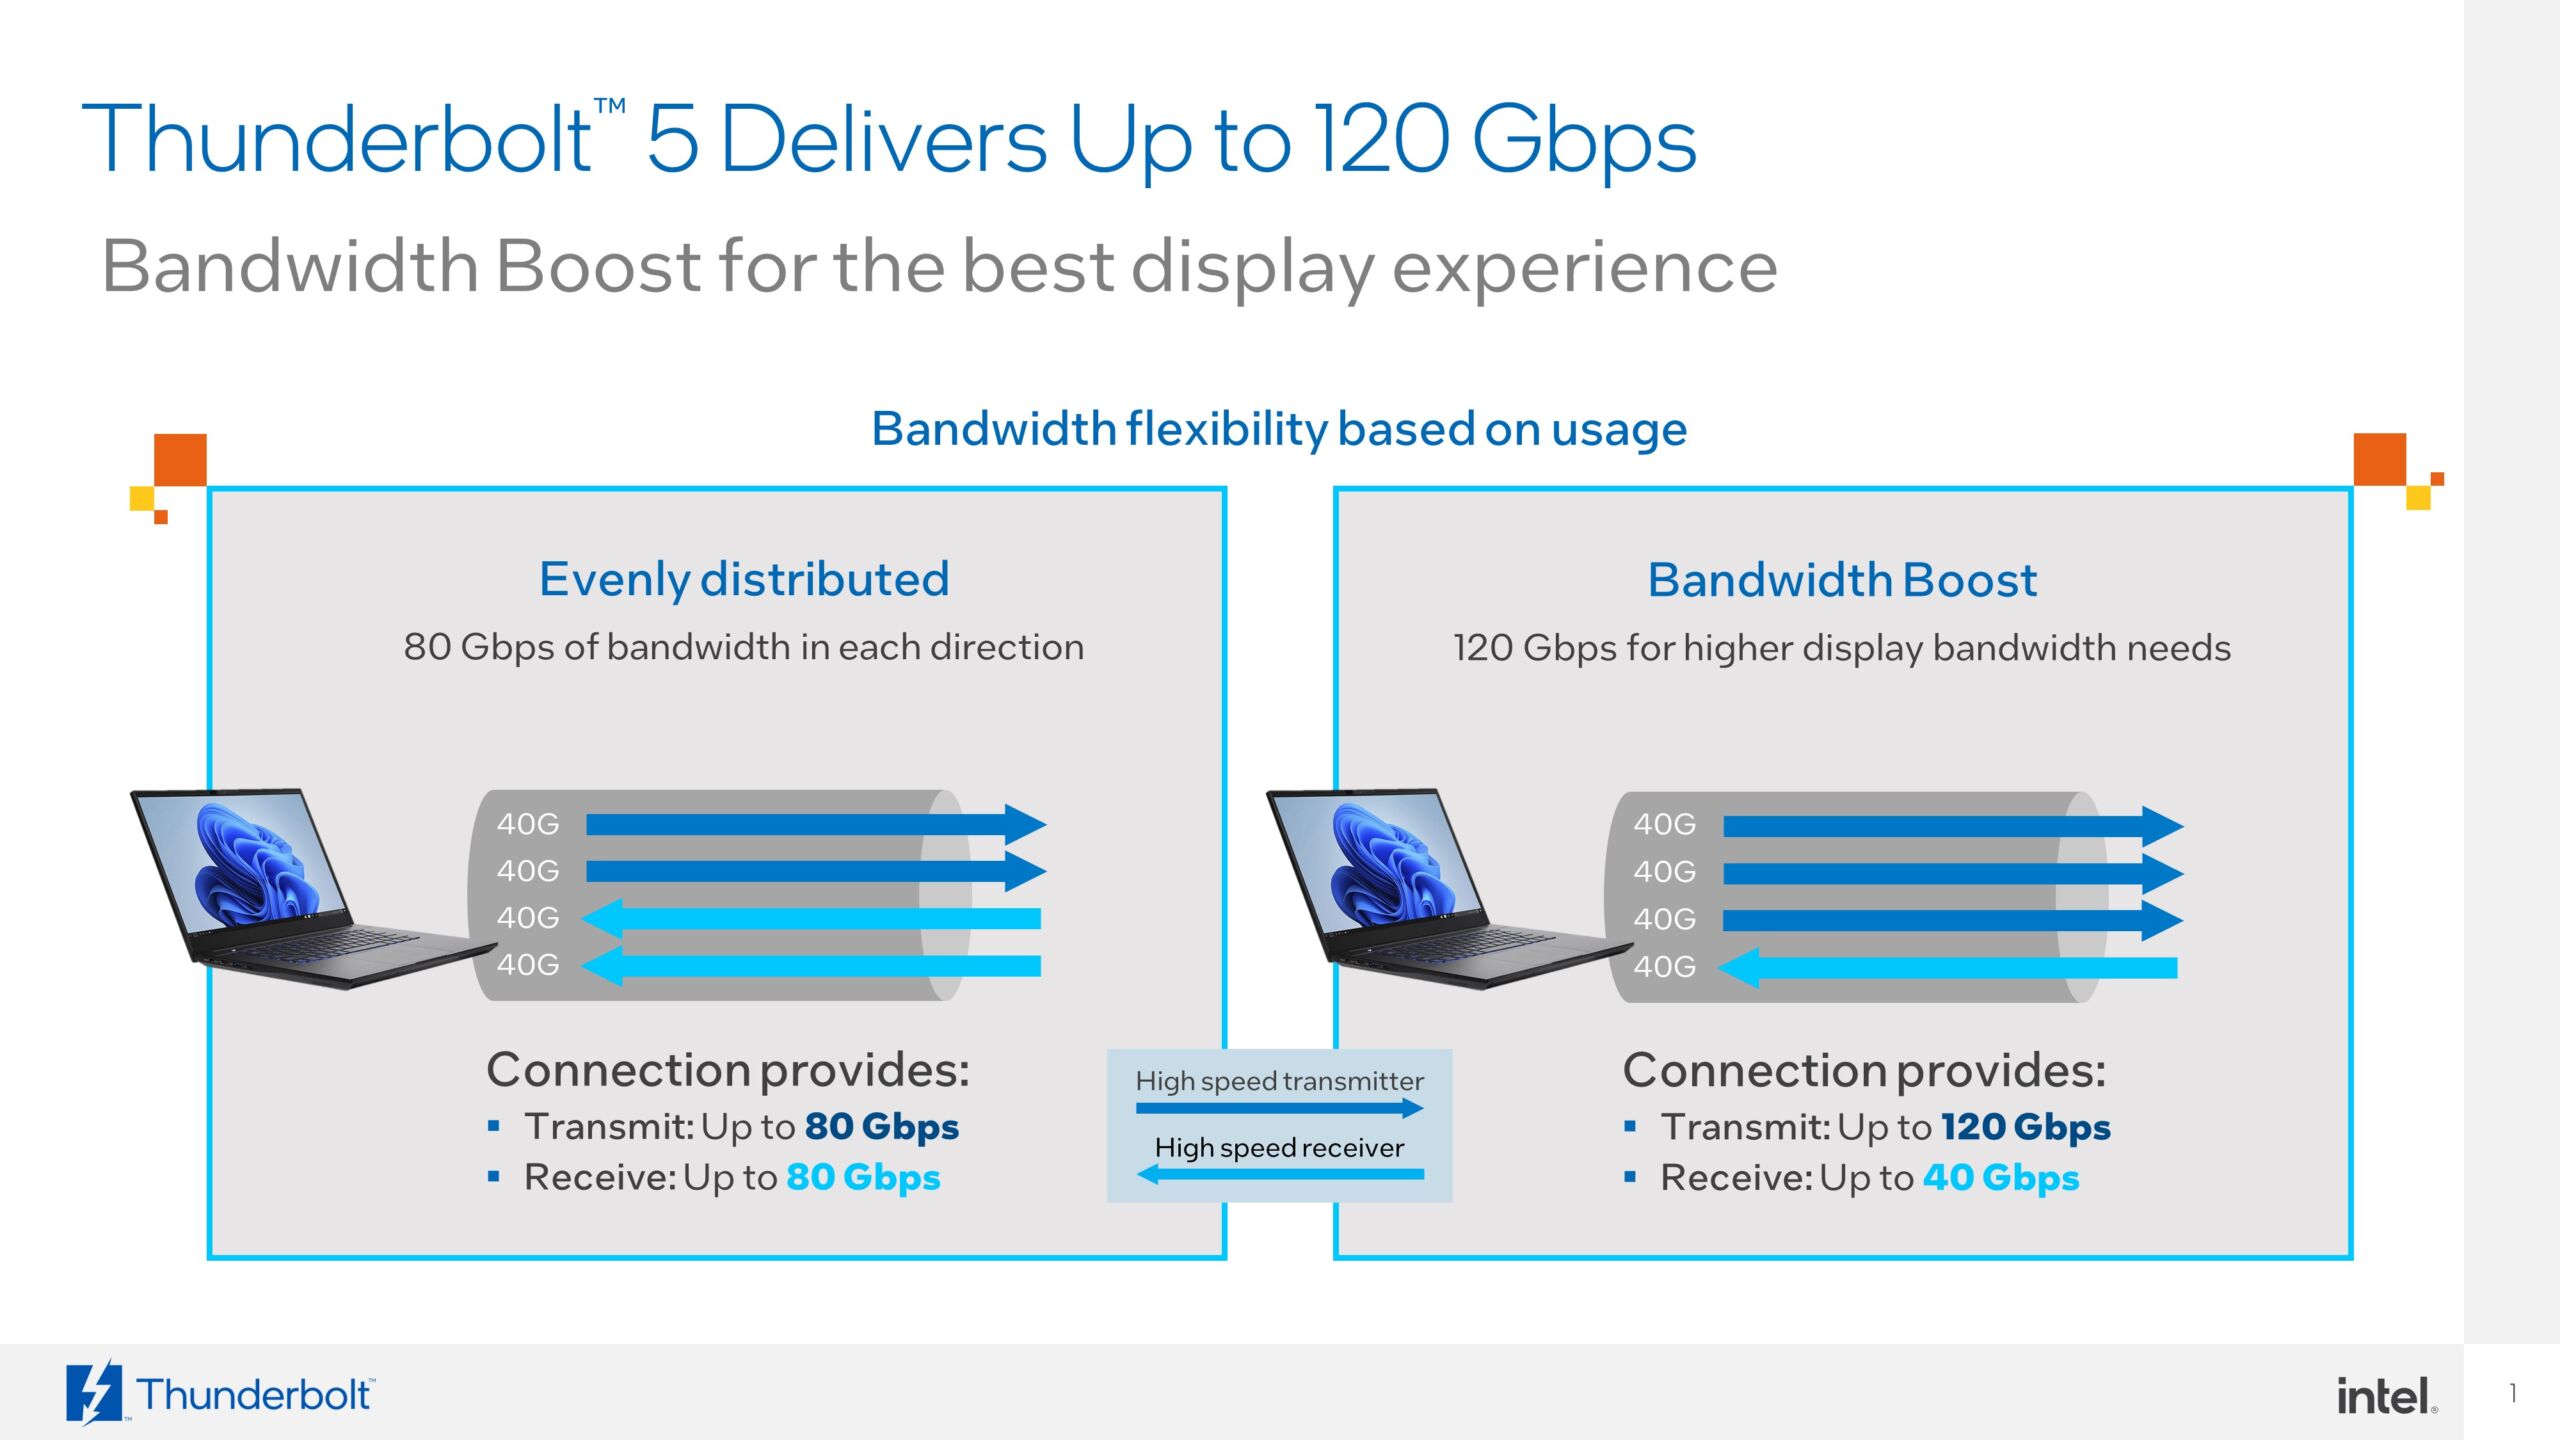 Supports dynamic bandwidth allotment, achieving up to 120Gbps in one direction for ultra-high-resolution displays